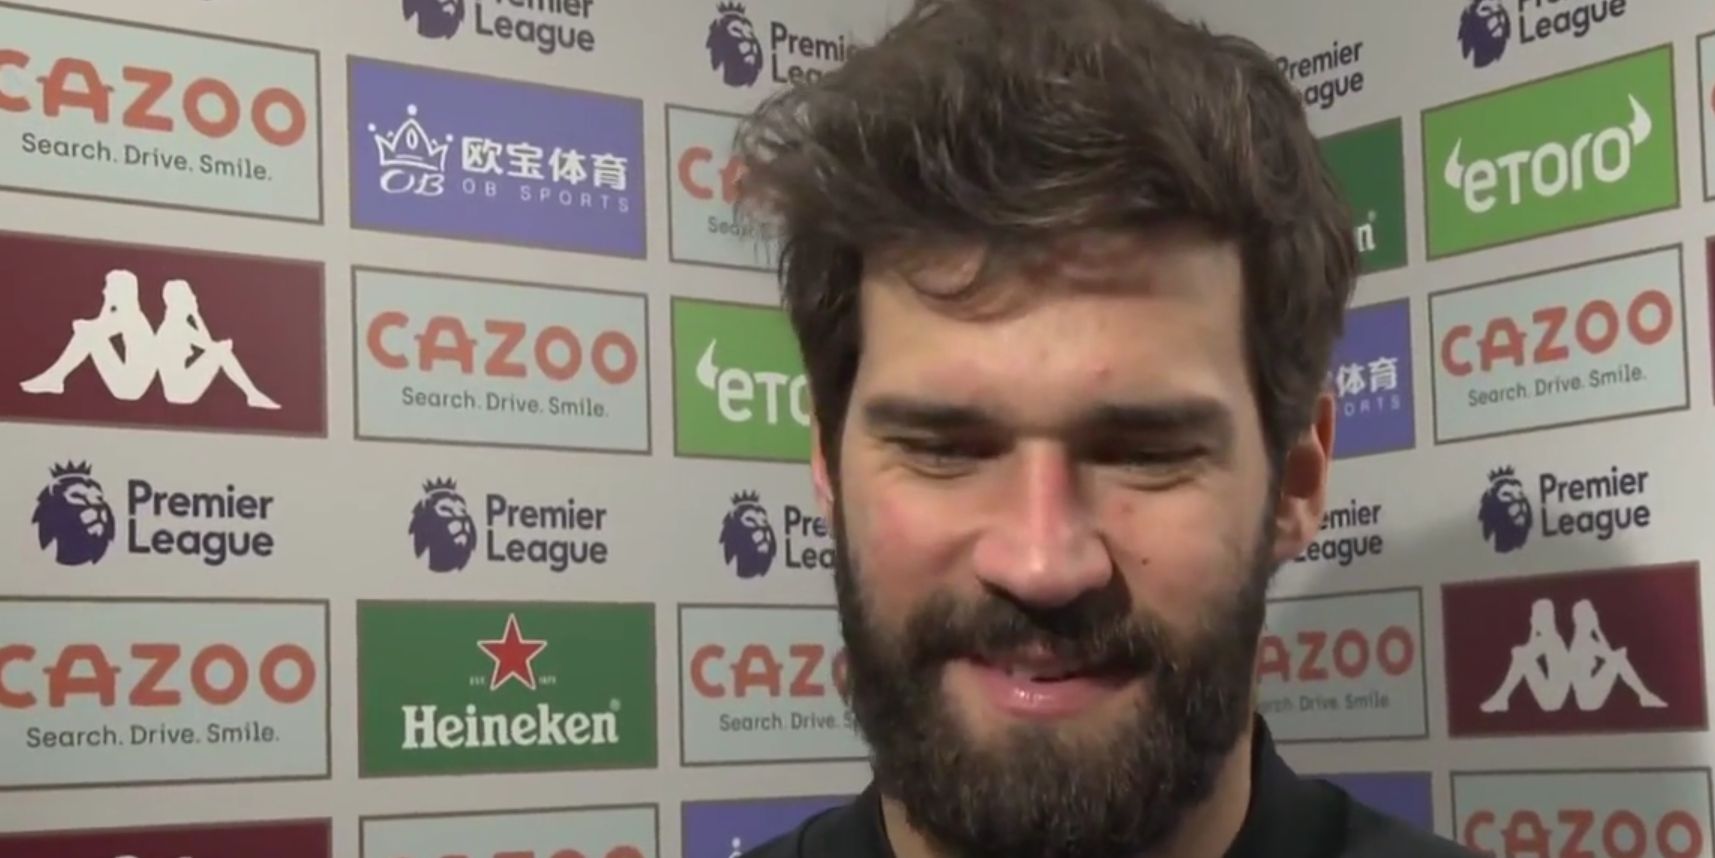 (Video) Alisson Becker on his excitement ahead of the FA Cup final and wanting to win ‘a trophy that this group hasn’t won yet’